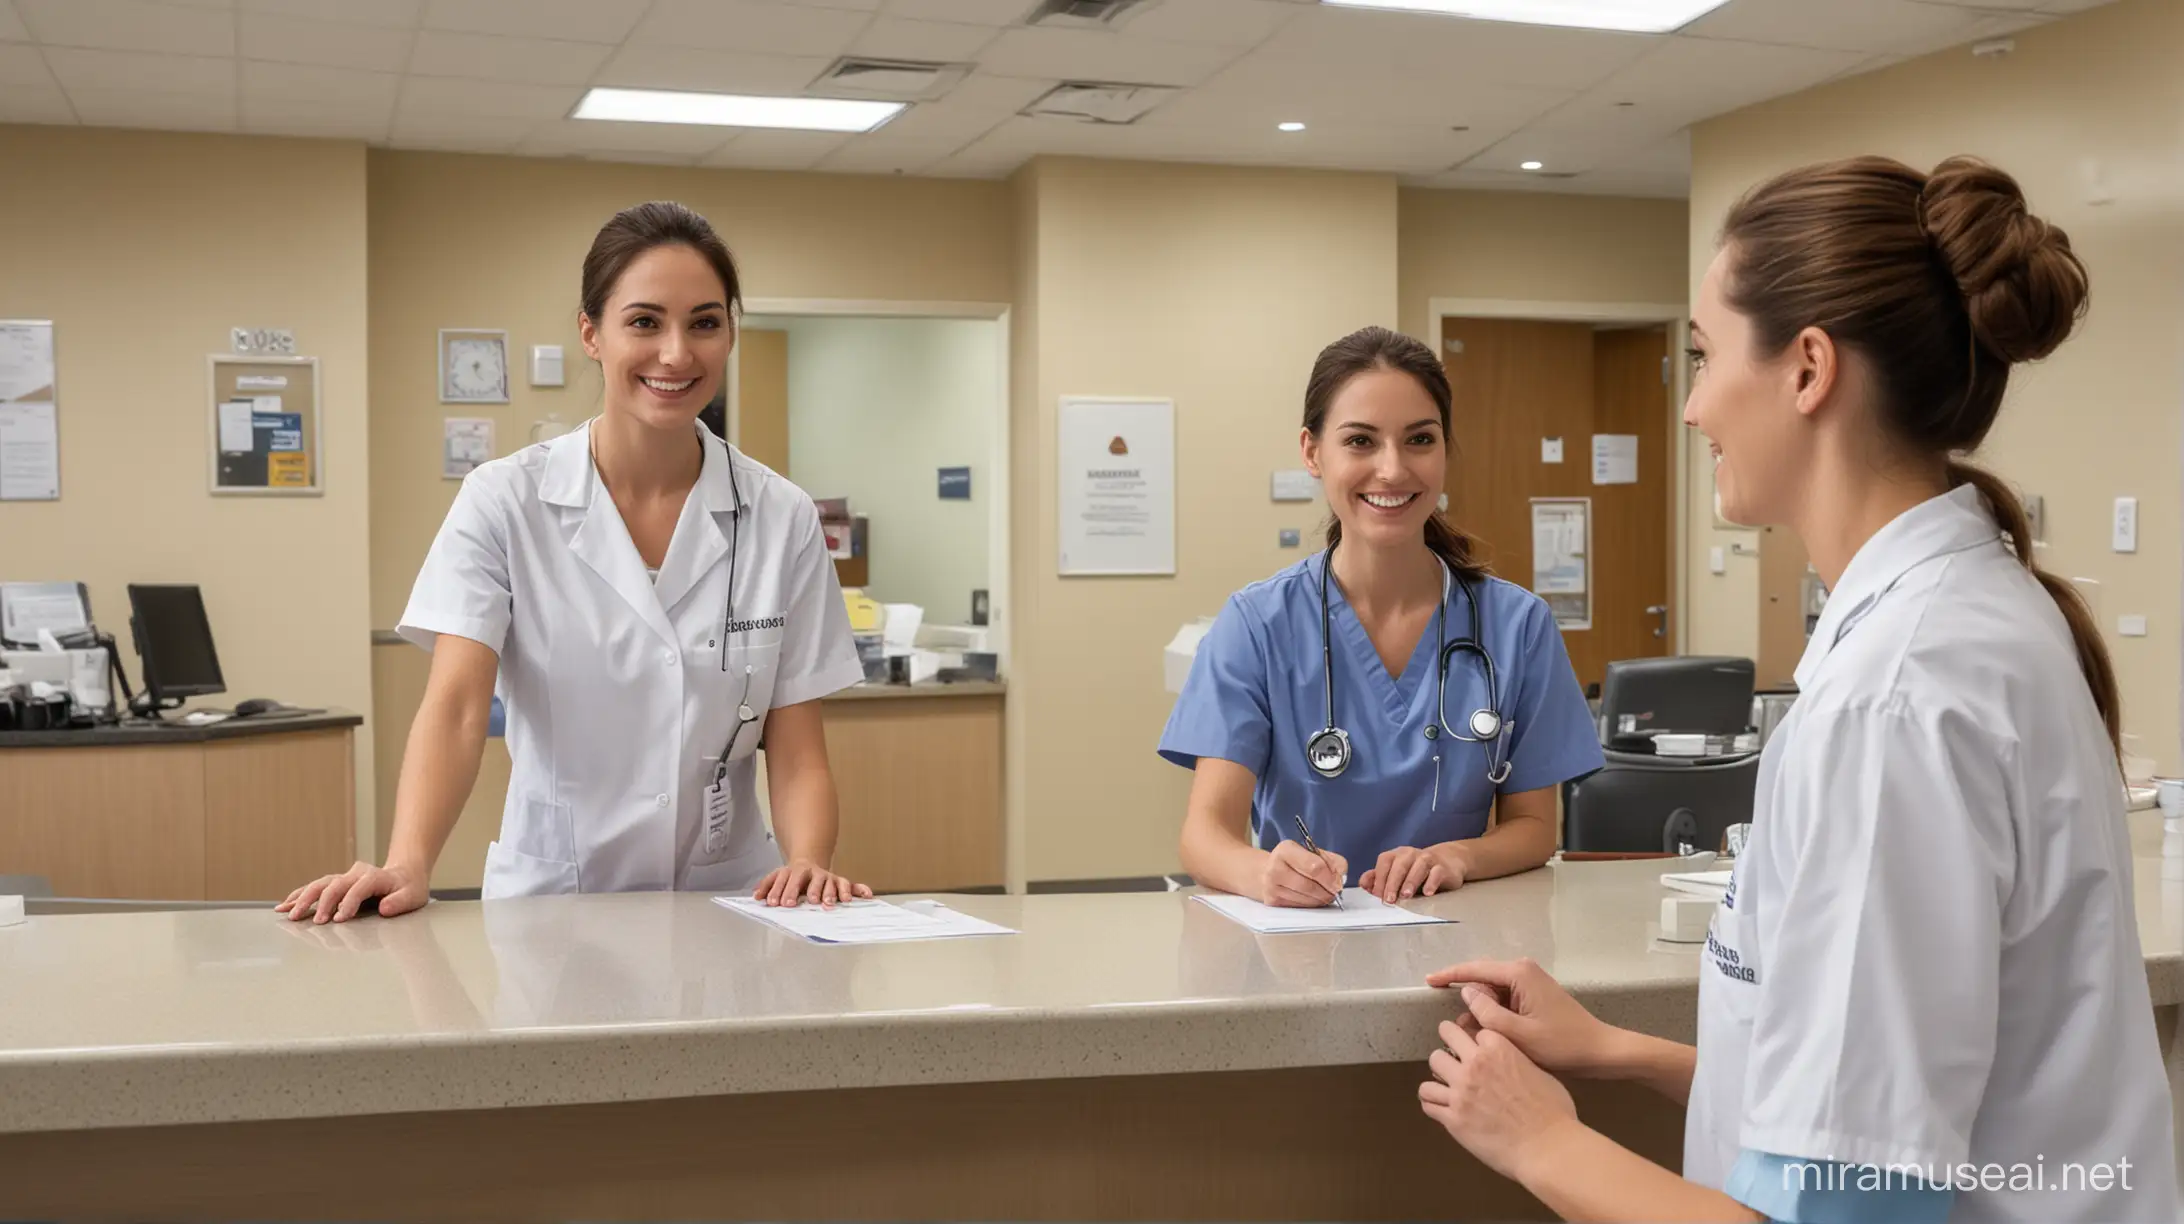 hospital front desk, a patient checking in and a nurse